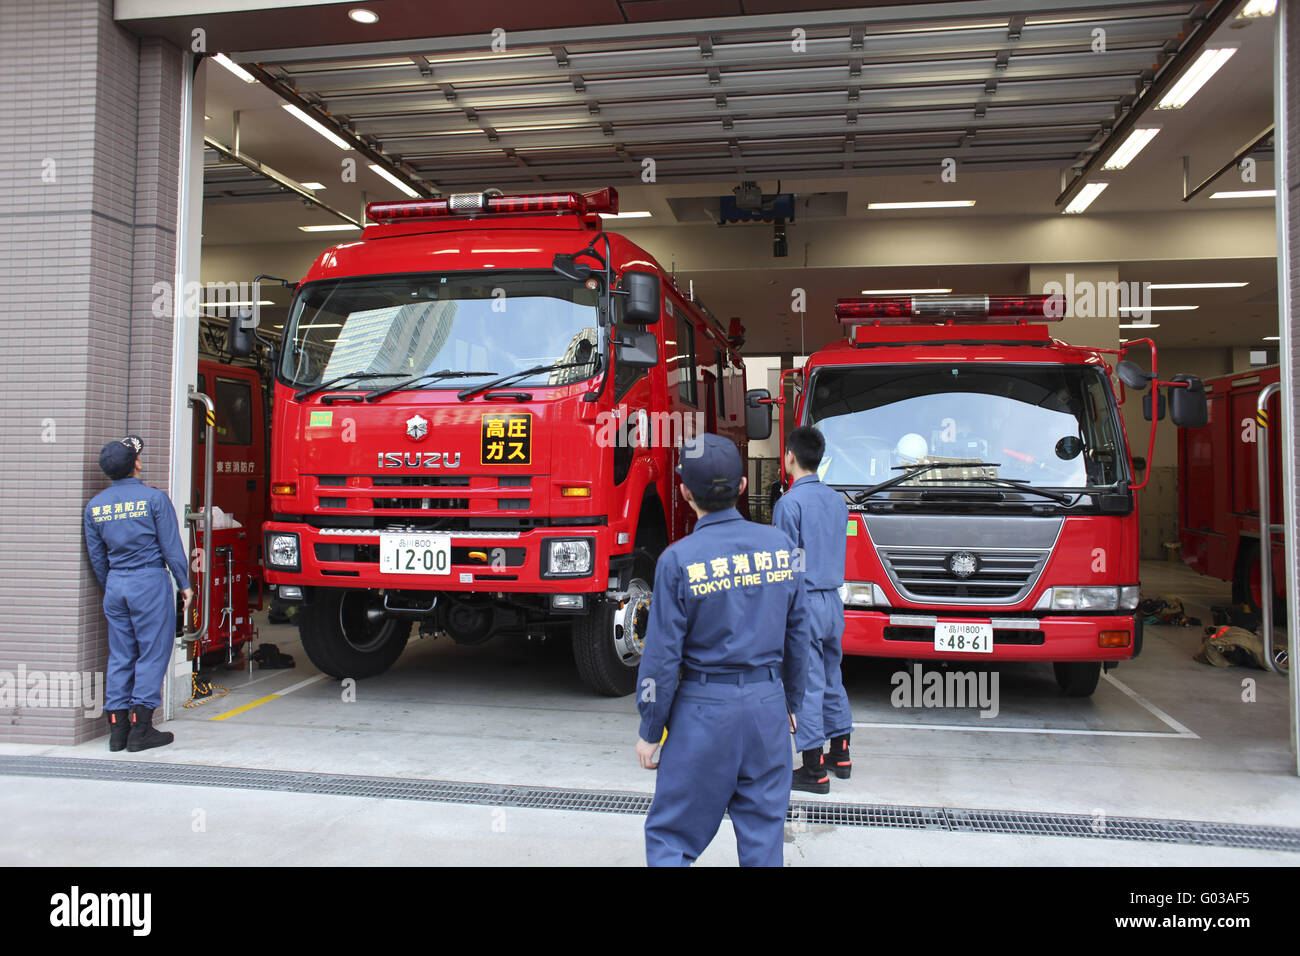 Firestation and Firefighters, Tokio Stock Photo